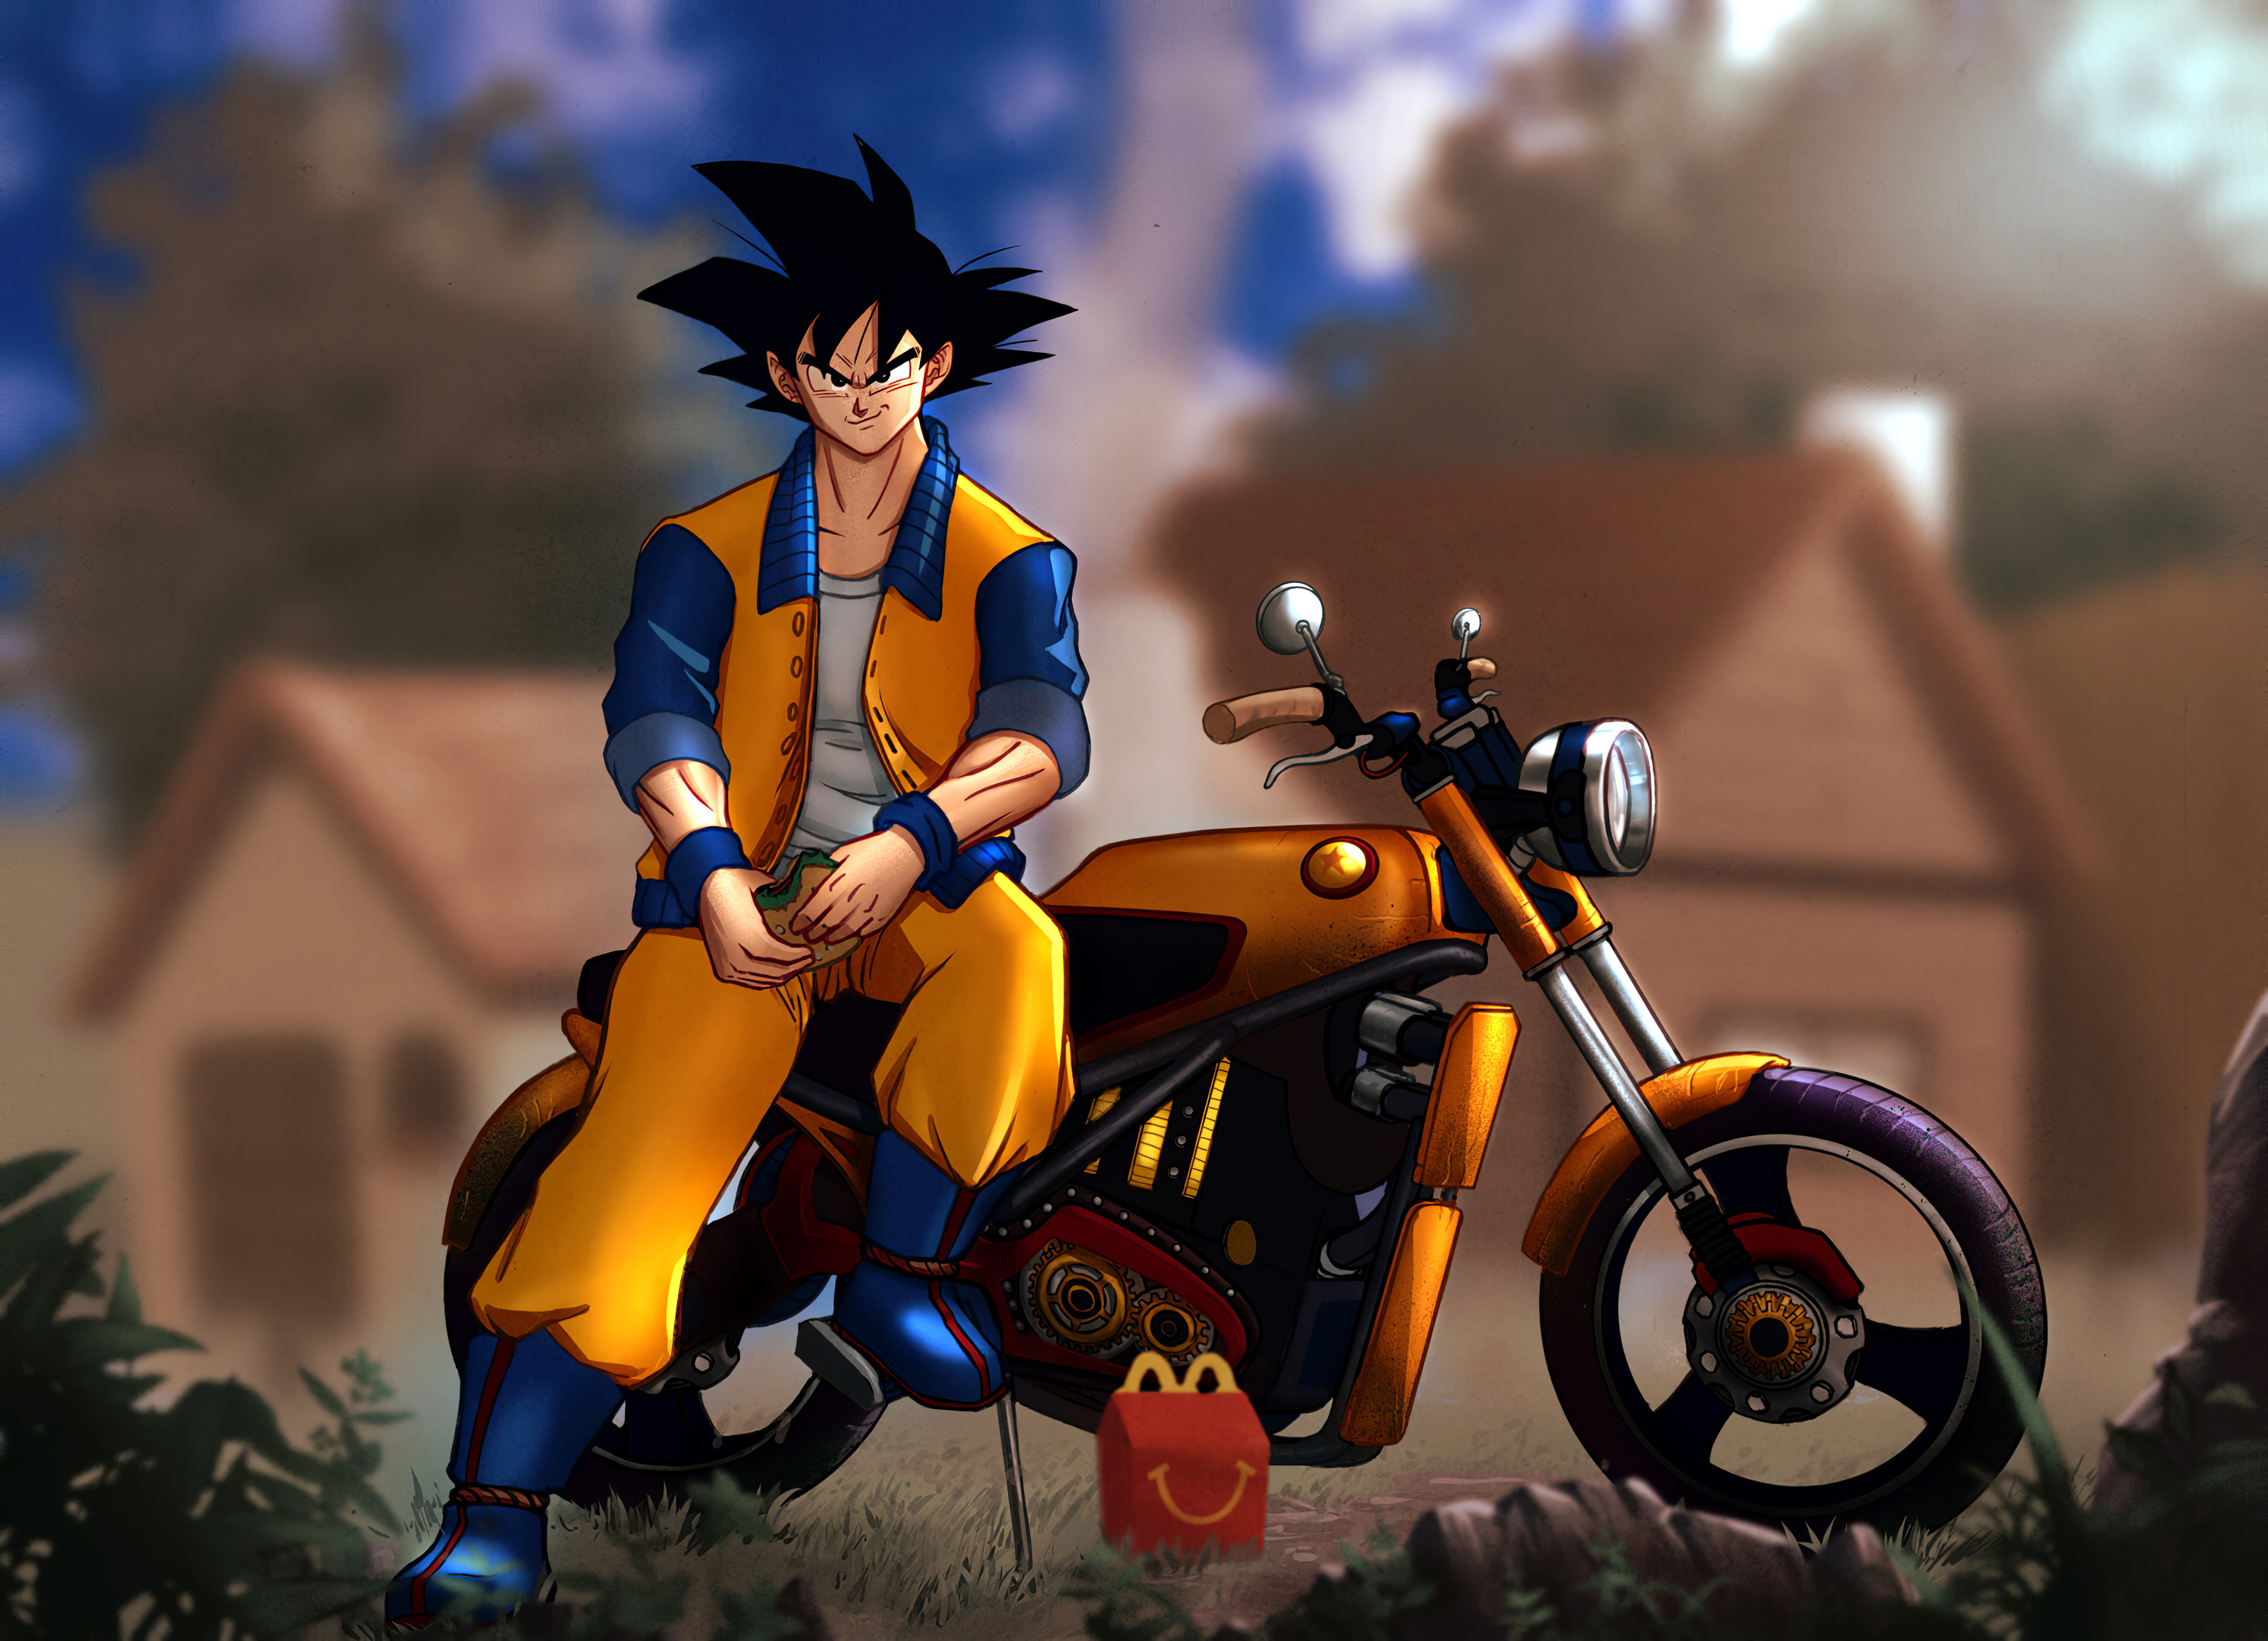 Steam Workshop::Anime Motorcycle girl (Fixed Presets)